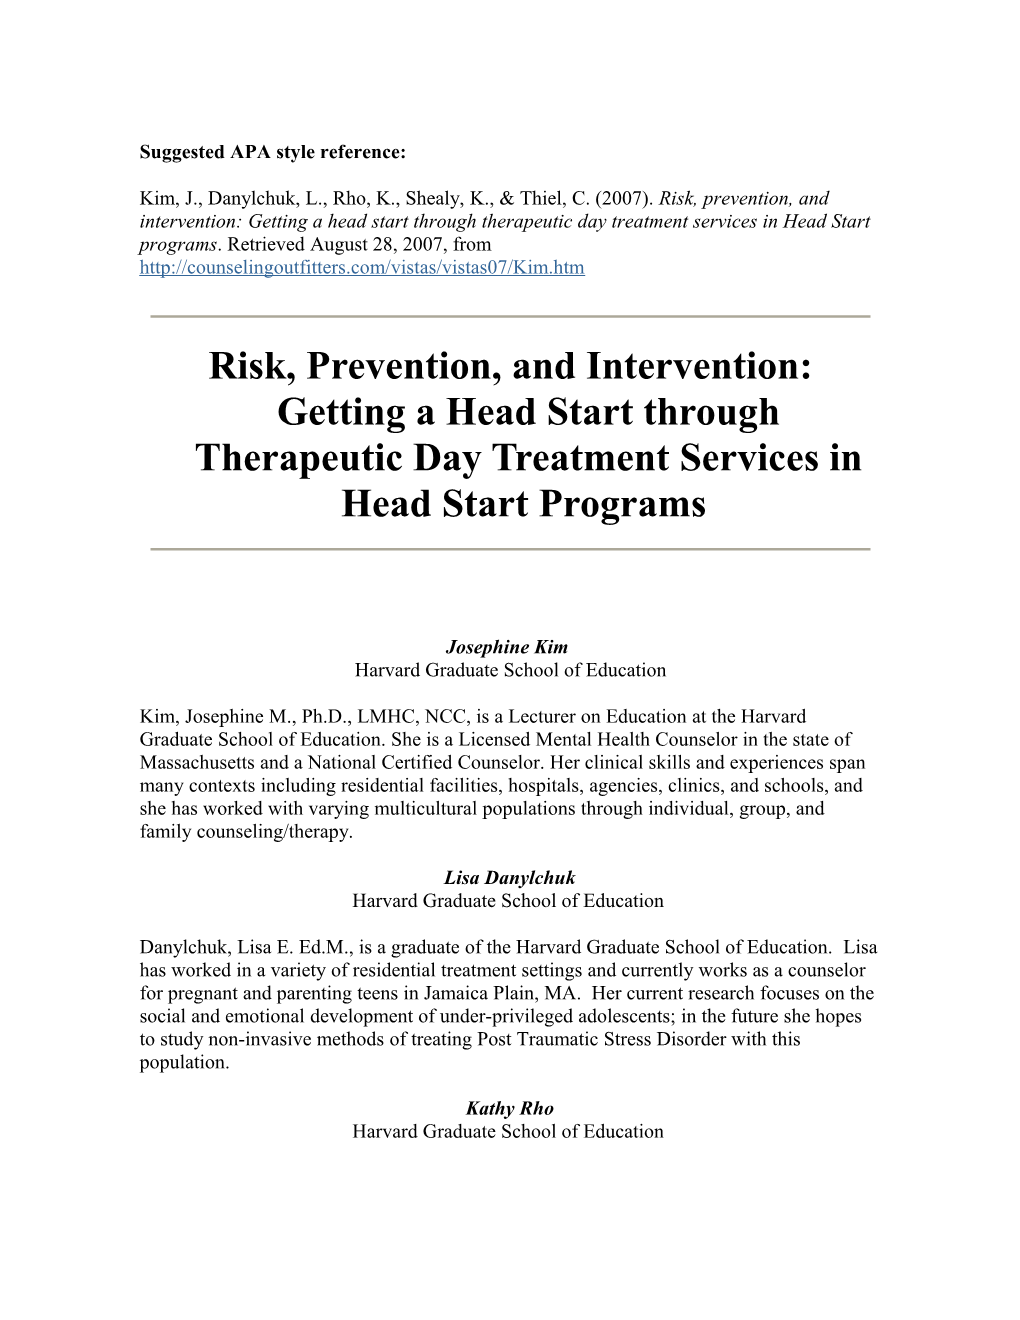 Risk, Prevention, and Intervention: Getting a Head Start Through Therapeutic Day Treatment